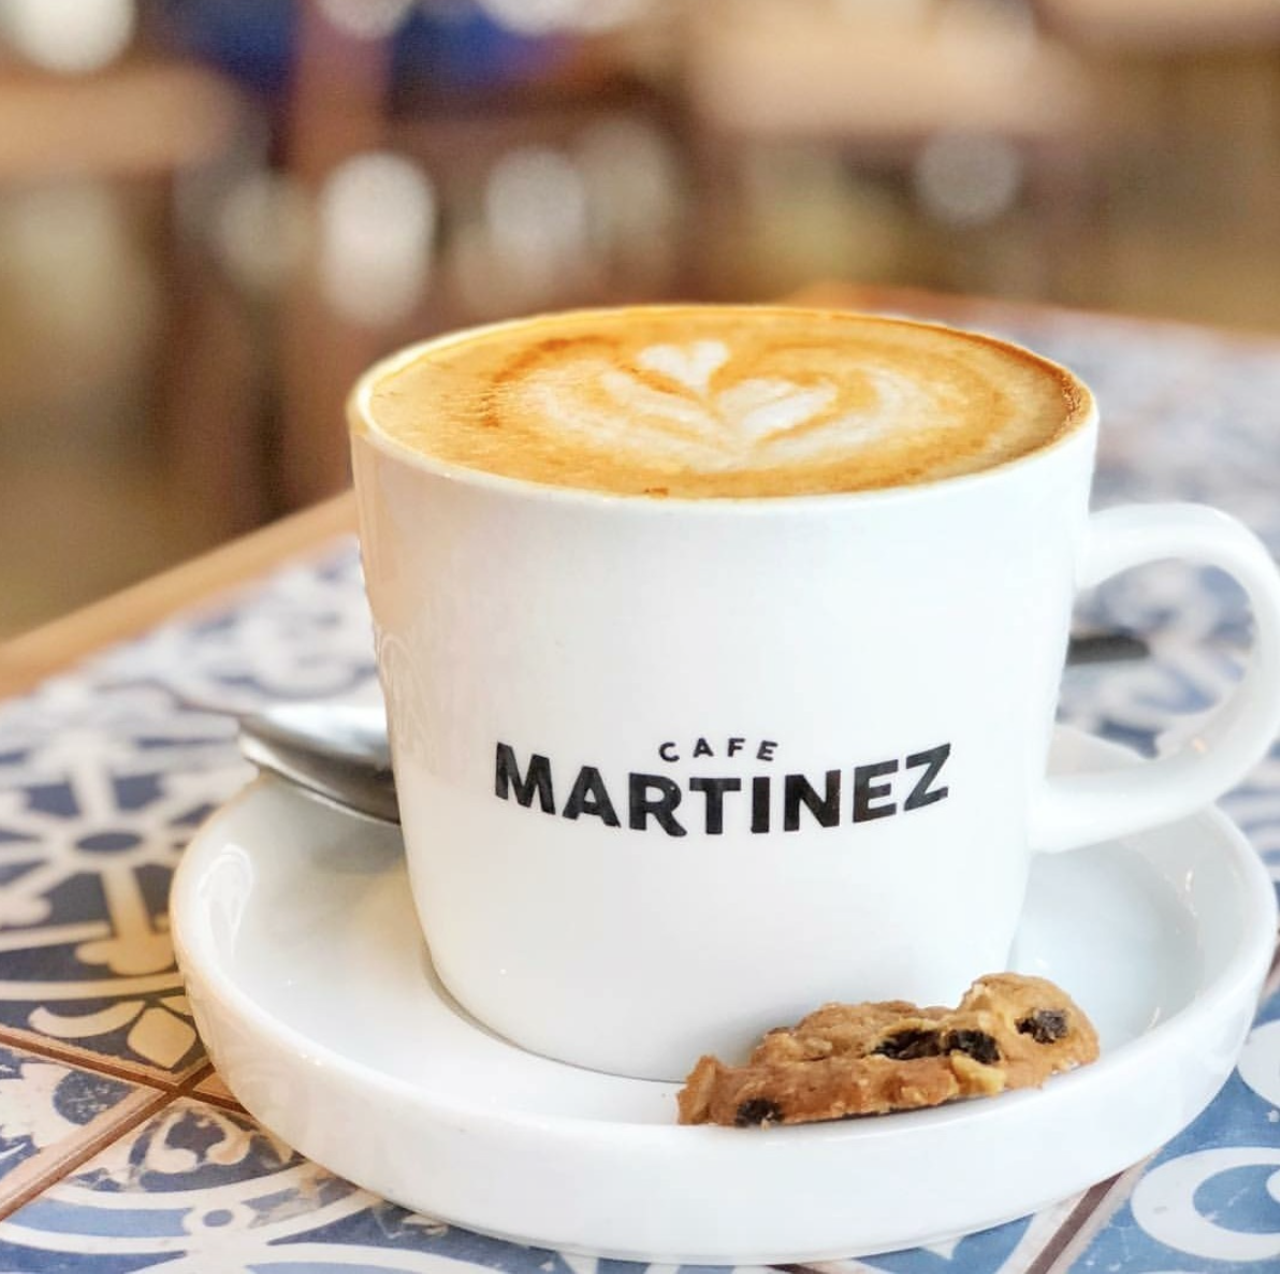 Cafe Martinez
7302 Louis Pasteur Drive, (210) 231-0095, cafemartinez.com
This cute cafe is based in Argentina with locations all over the world. Treat yourself to speciality coffee drinks and beef empanadas. 
Photo via Instagram / cafemartinezsanantonio